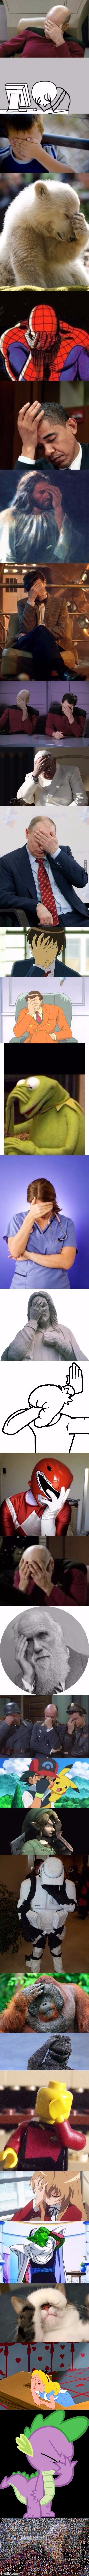 The Epic Facepalm | . | image tagged in the epic facepalm | made w/ Imgflip meme maker